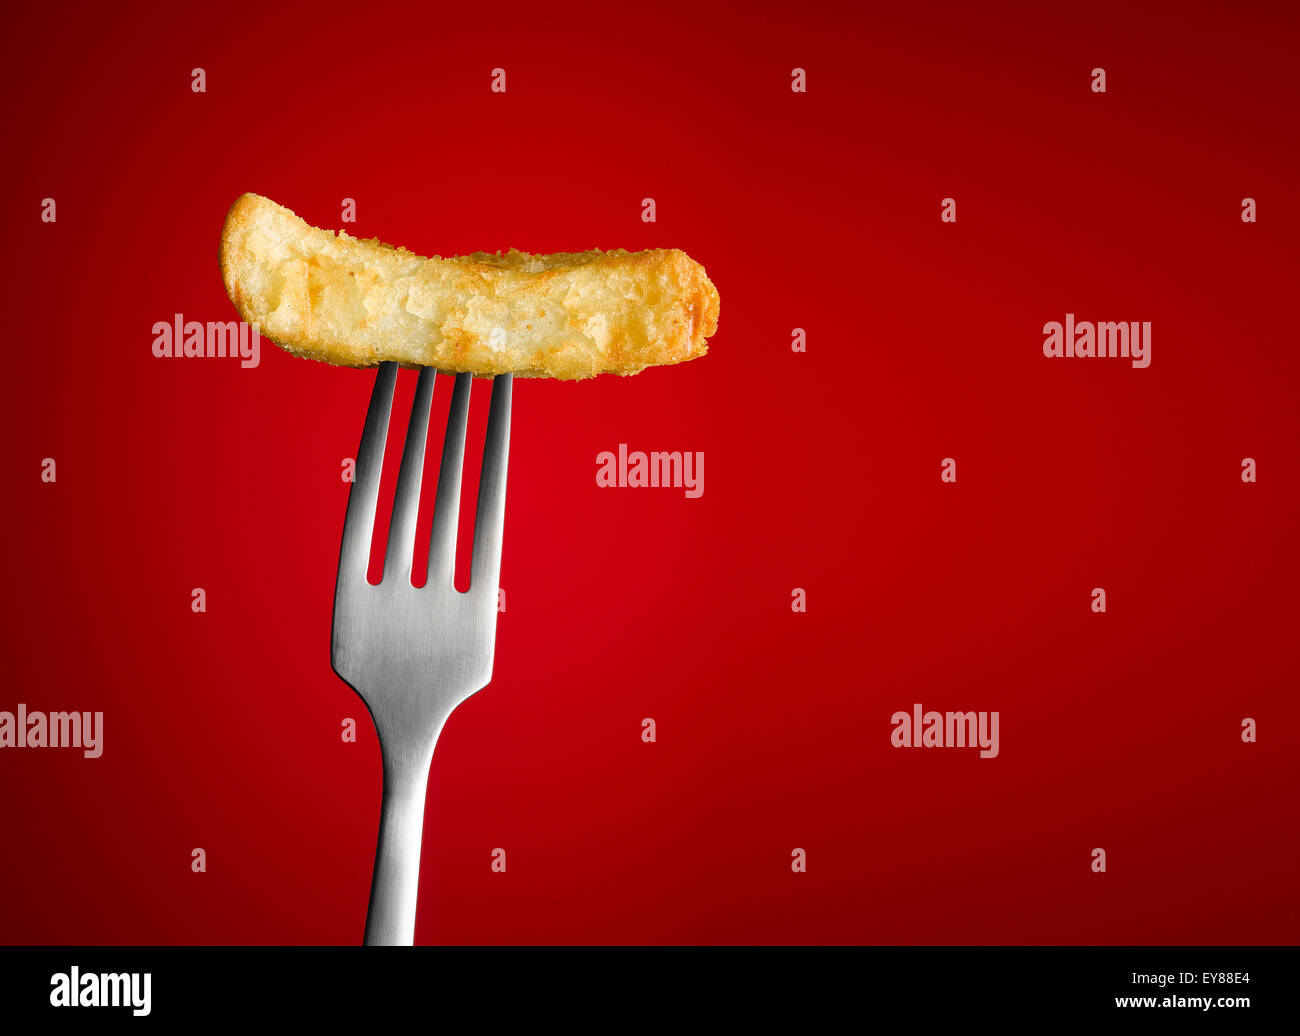 Chip on silver Fork with a red background Stock Photo